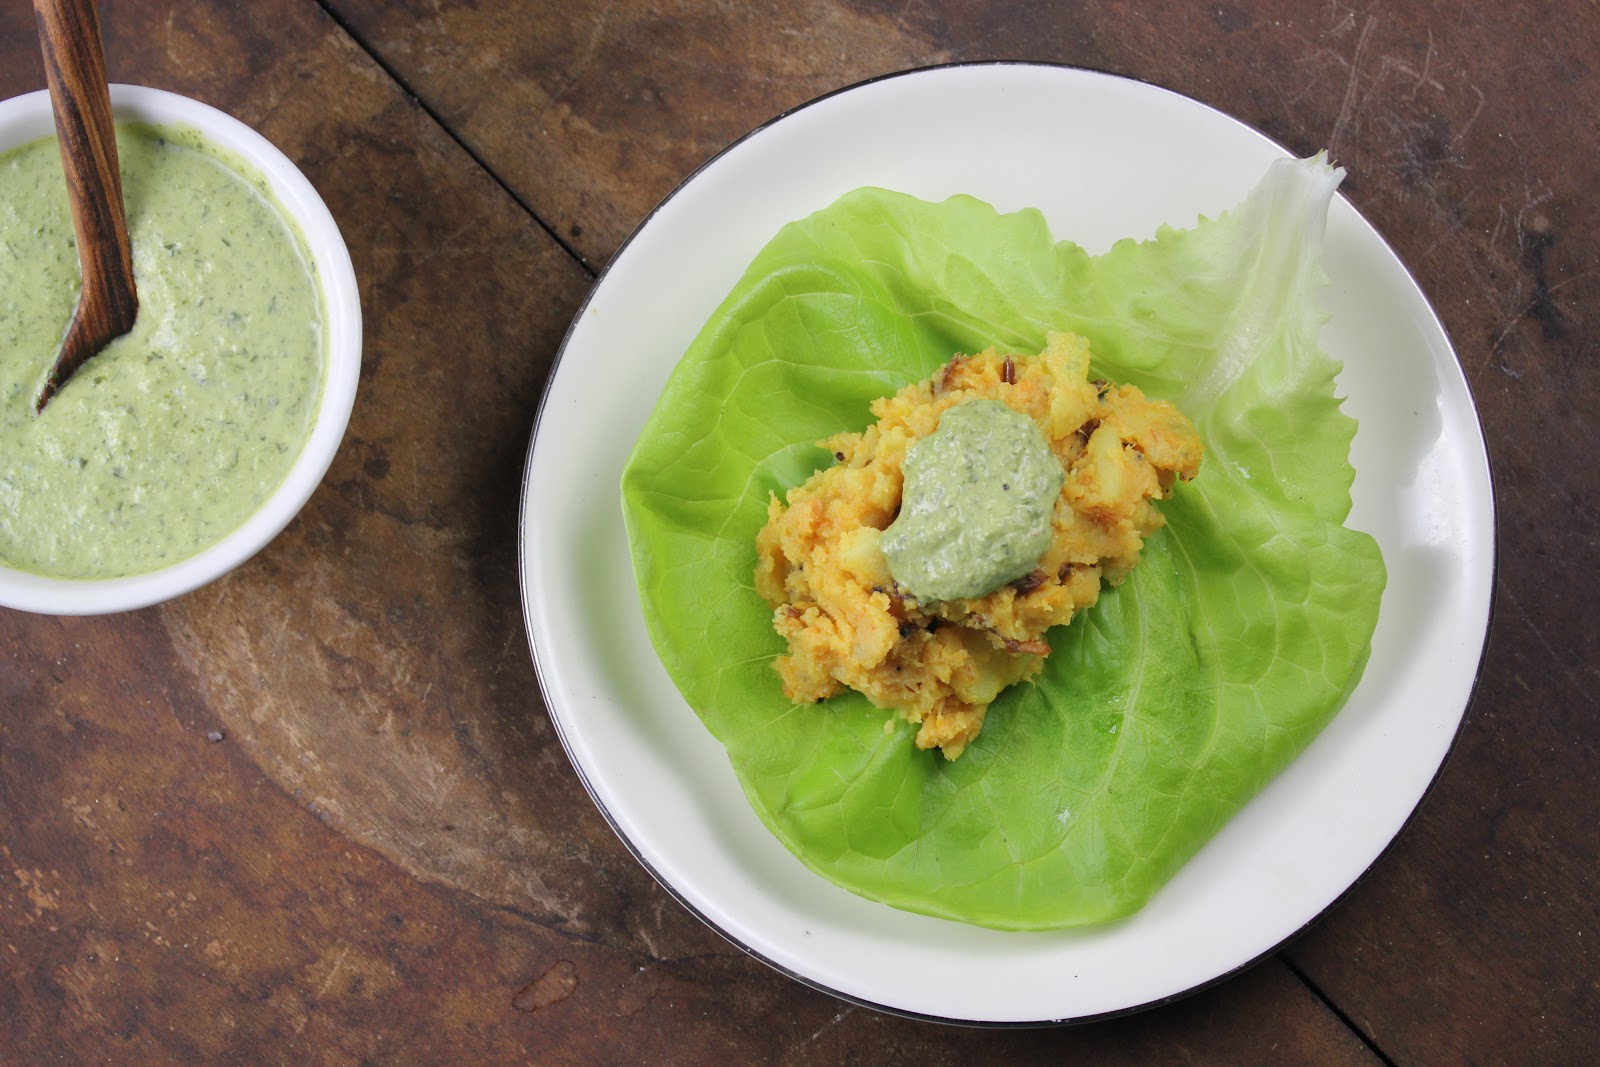 butter lettuce filled with potato dosa filling and coconut chutney